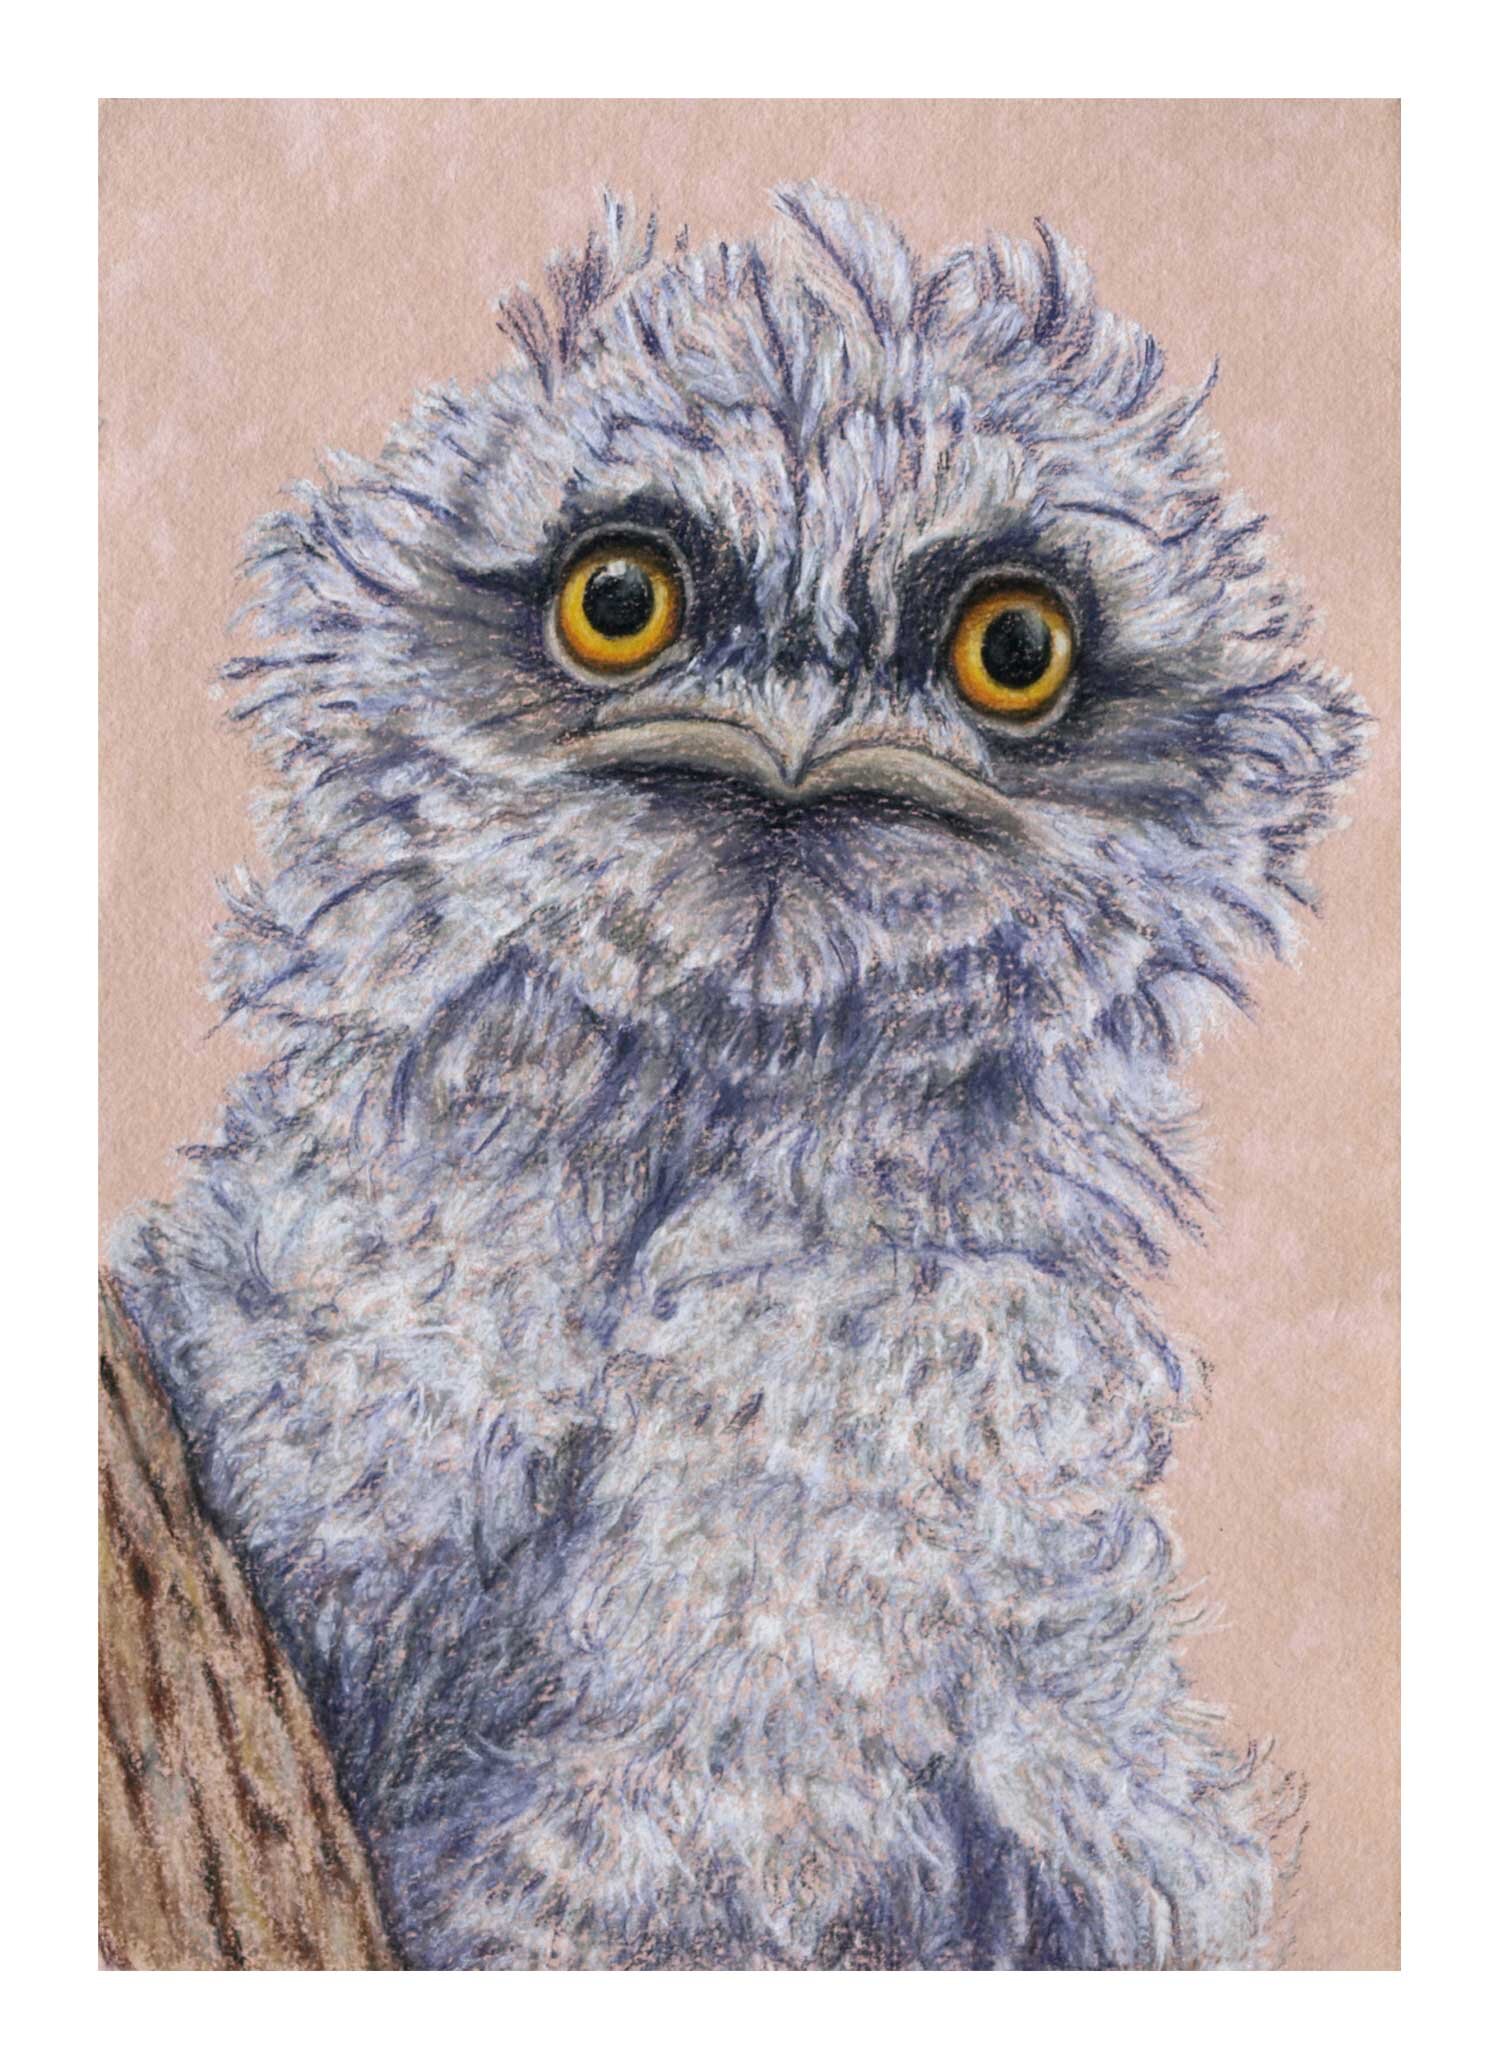 Tawny Frogmouth Chick